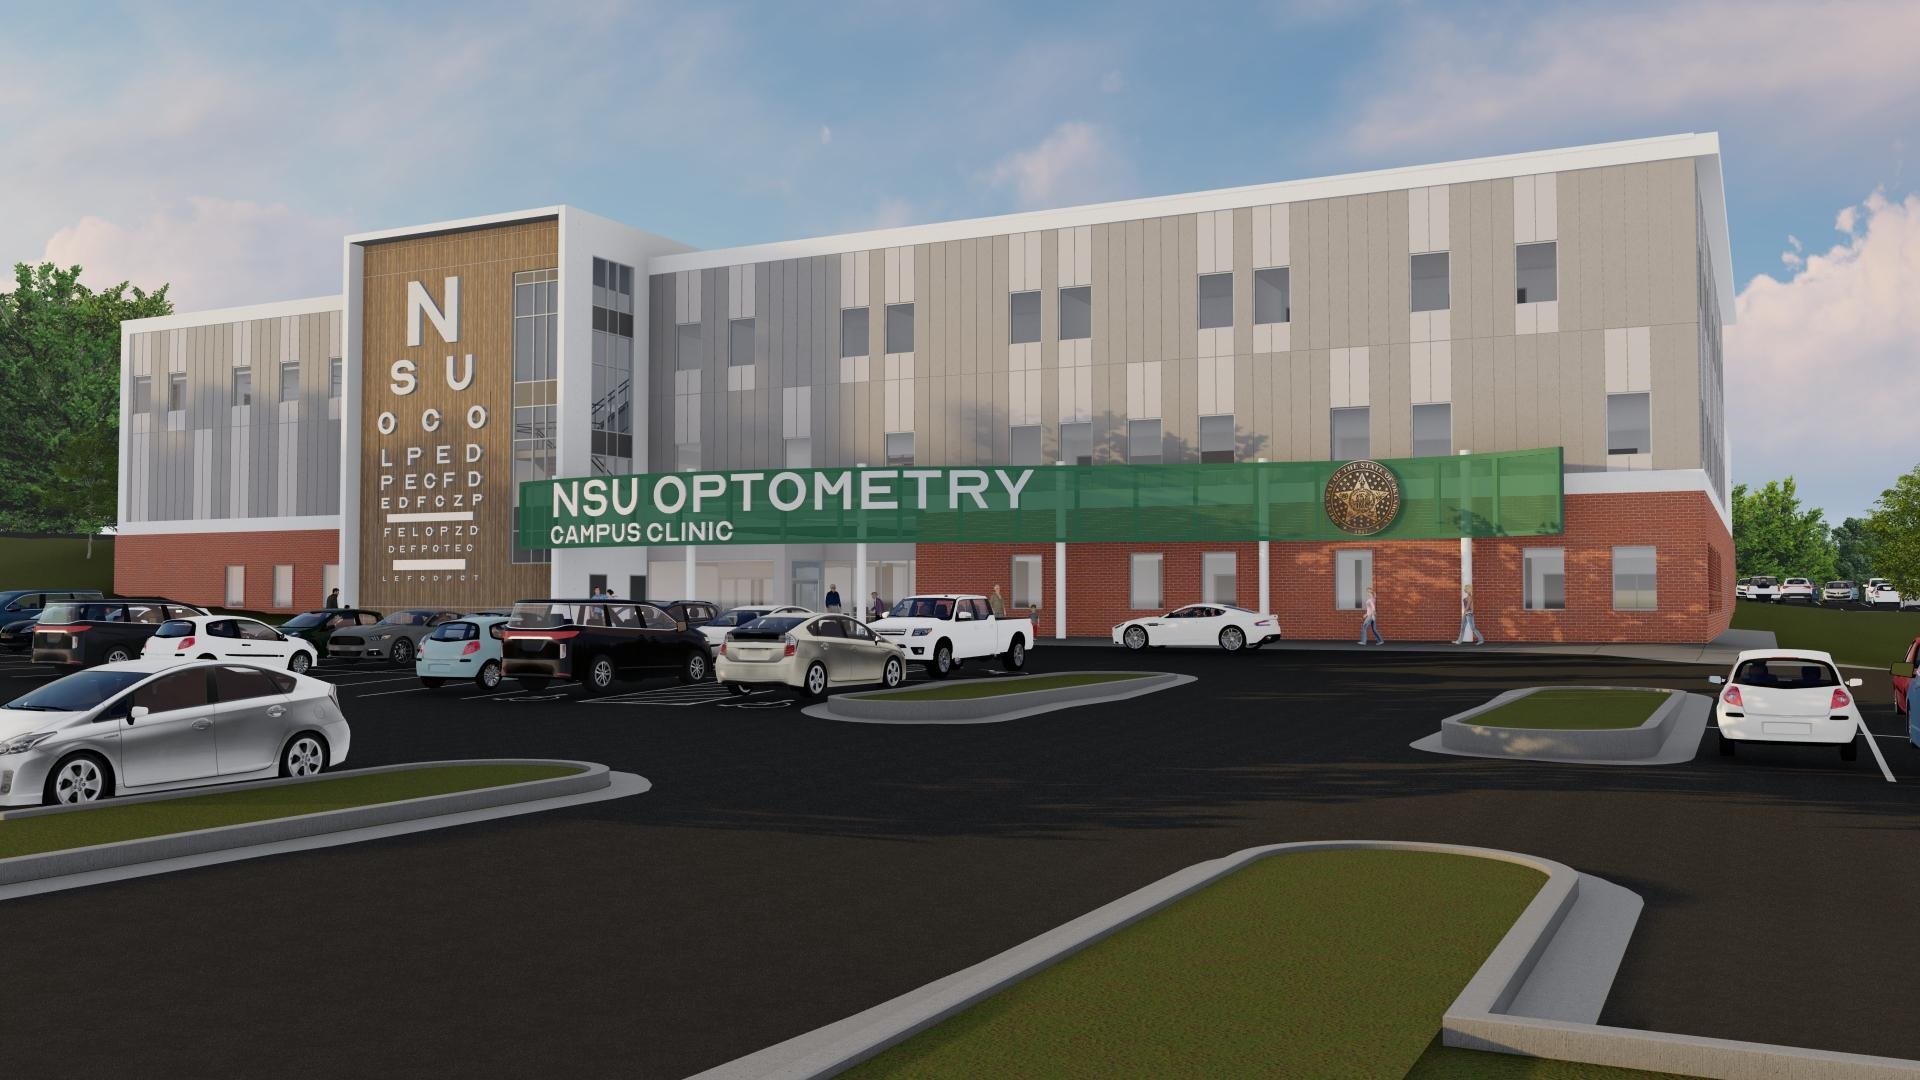 Oklahoma College of Optometry Is Building a New $40 Million Facility